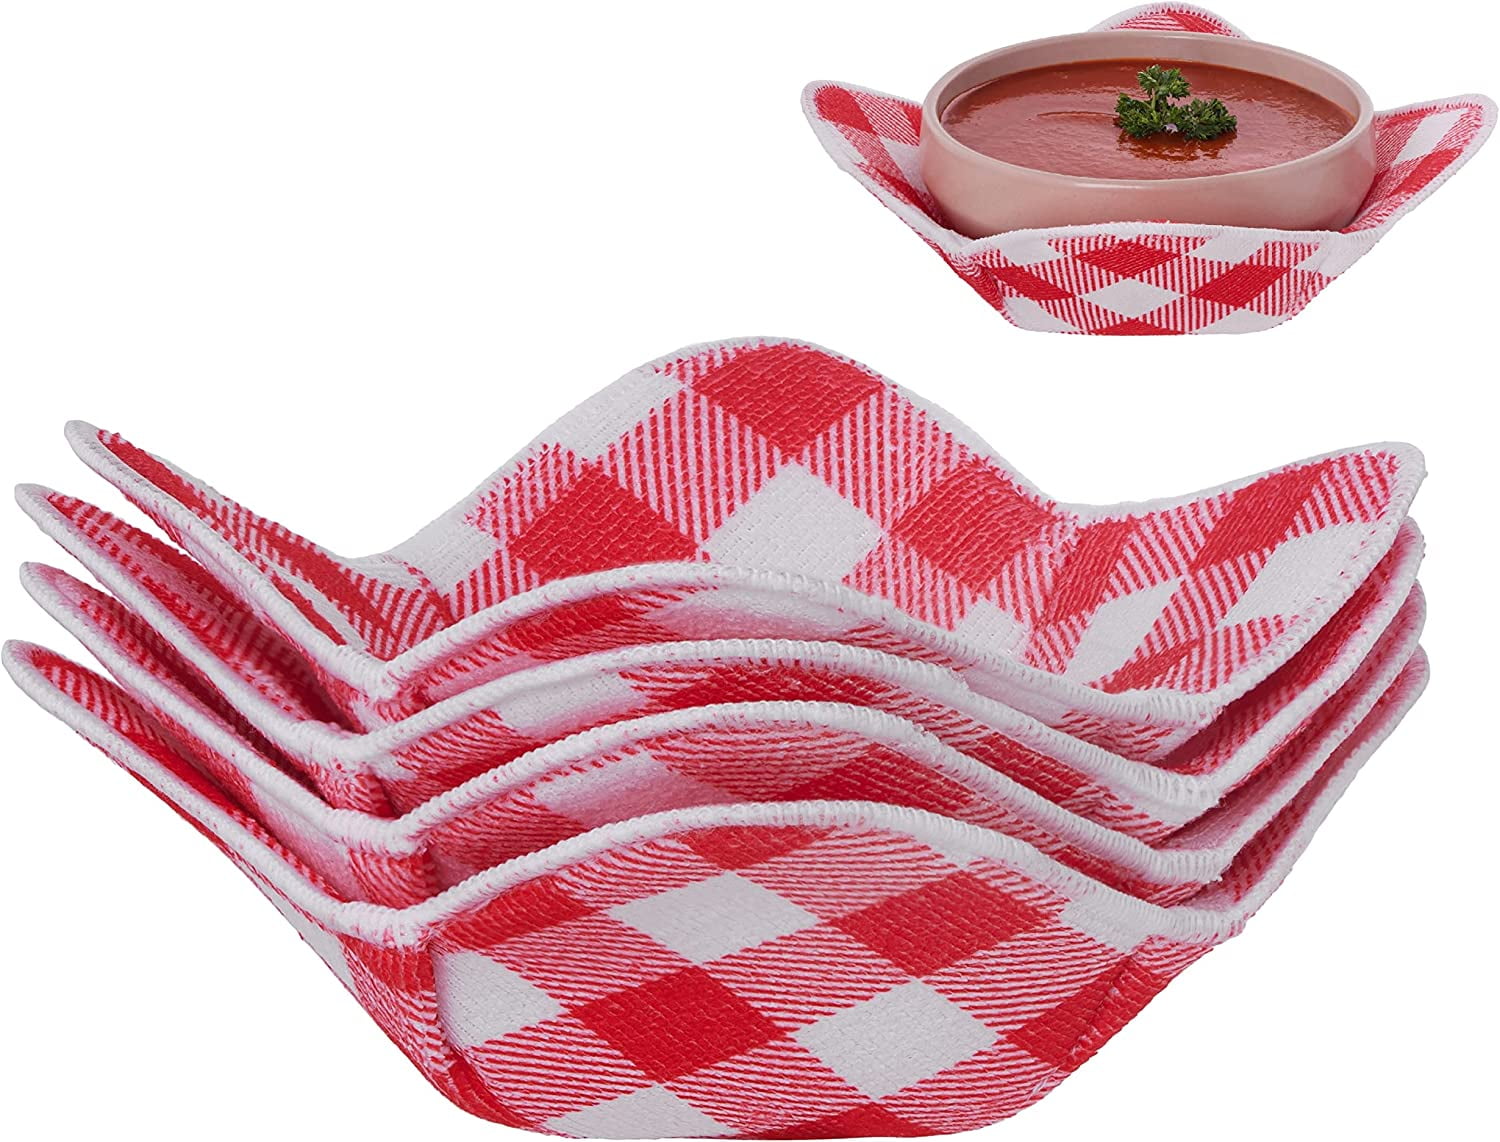 Microwave Bowl Cozy Huggers Set of 4 - Durable and Reliable - for Hot and Cold Bowls, Plates and Dishes Bowl Holder for Microwave - Bowl Cozies Ideal